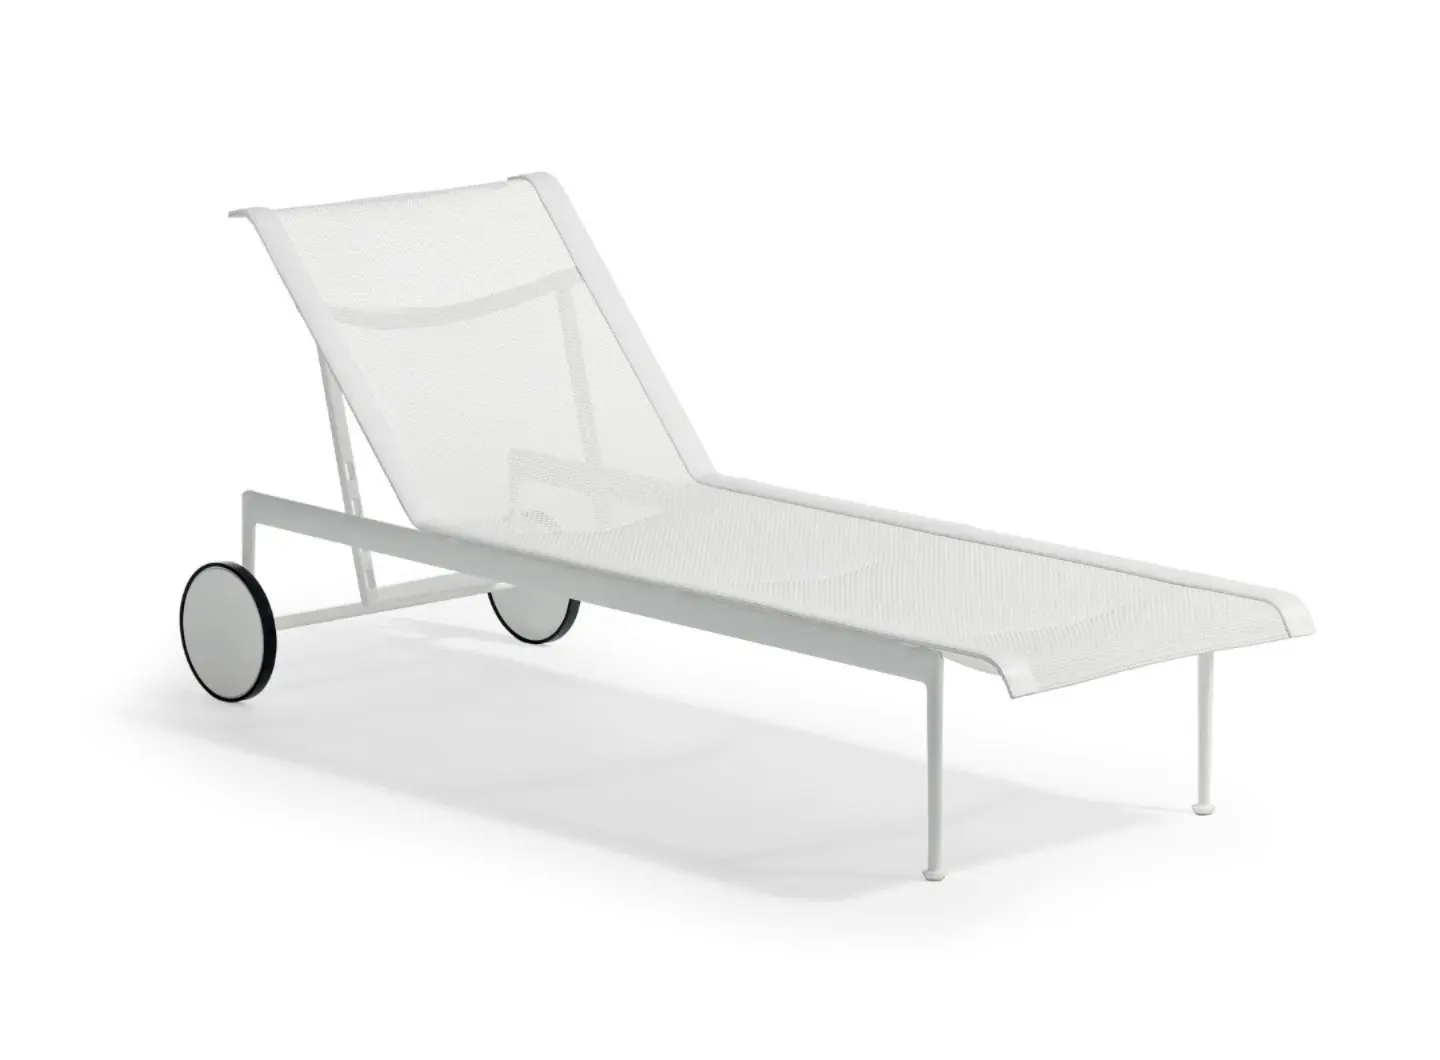 13_Knoll_1966 Adjustable Chaise Longue by Richard Schultz